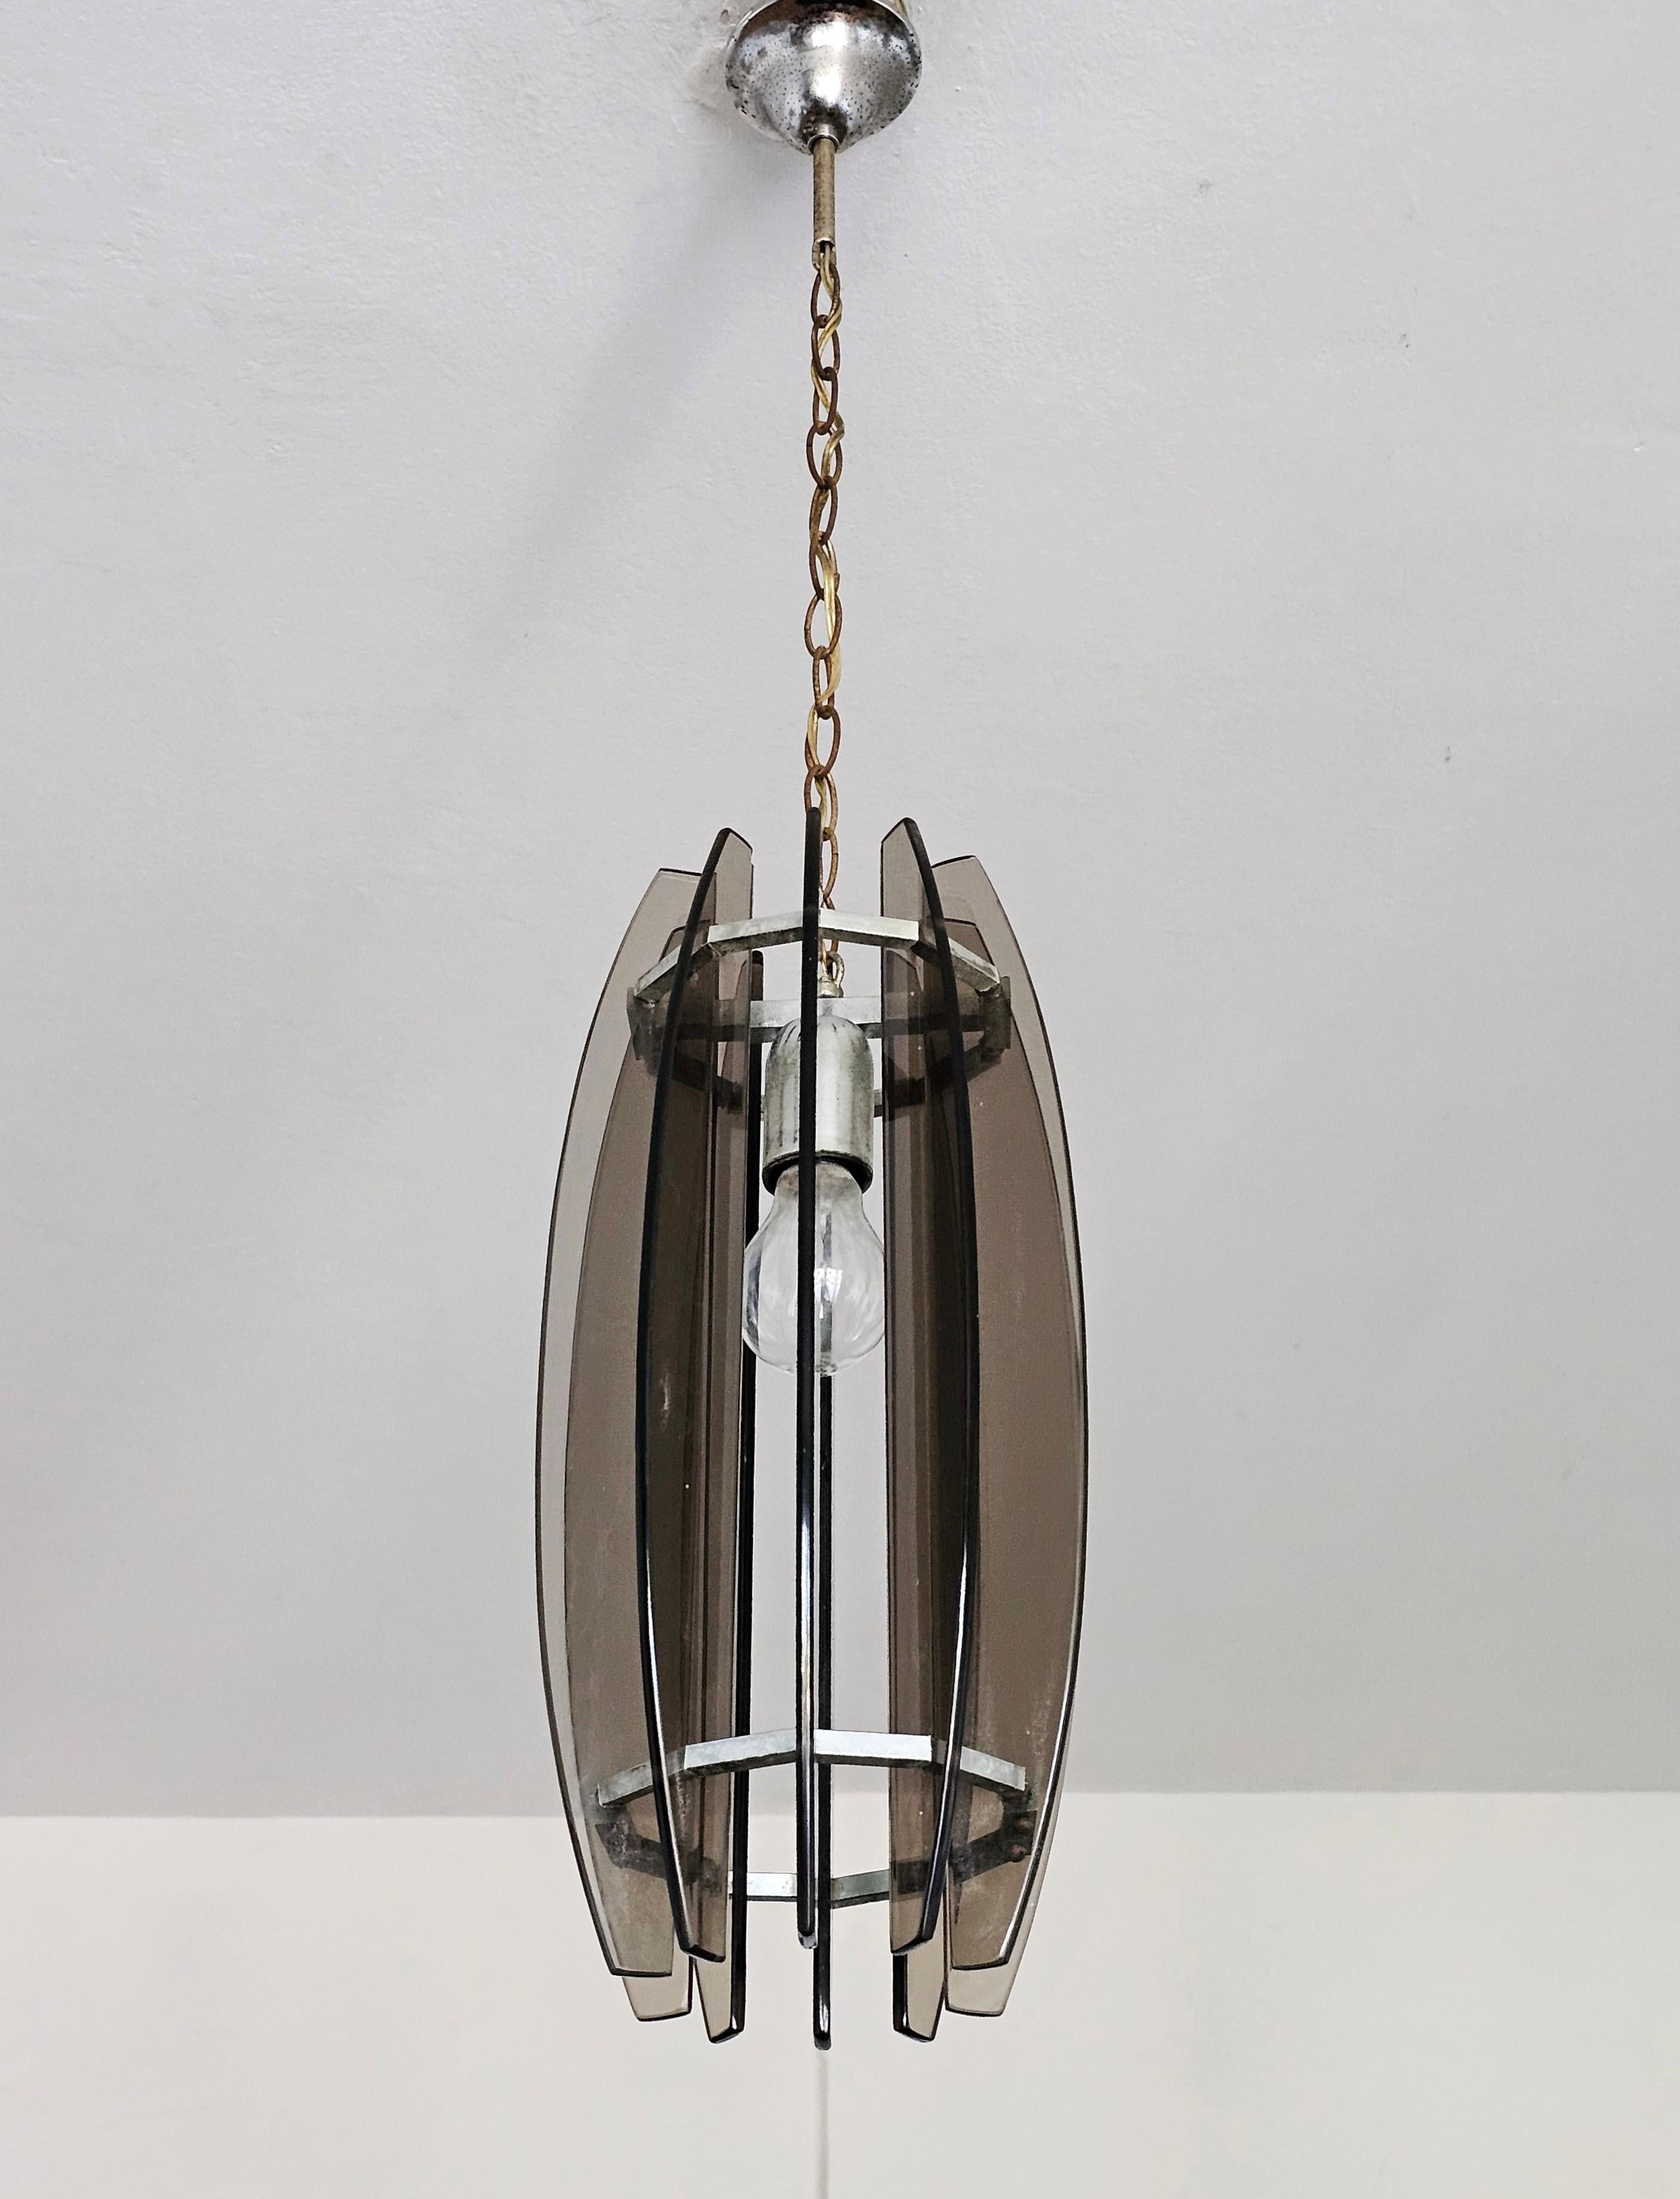 Mid-Century Modern Glass Pendant Light in Chrome and Smoked Glass in Fontana Arte style, Italy 1970 For Sale